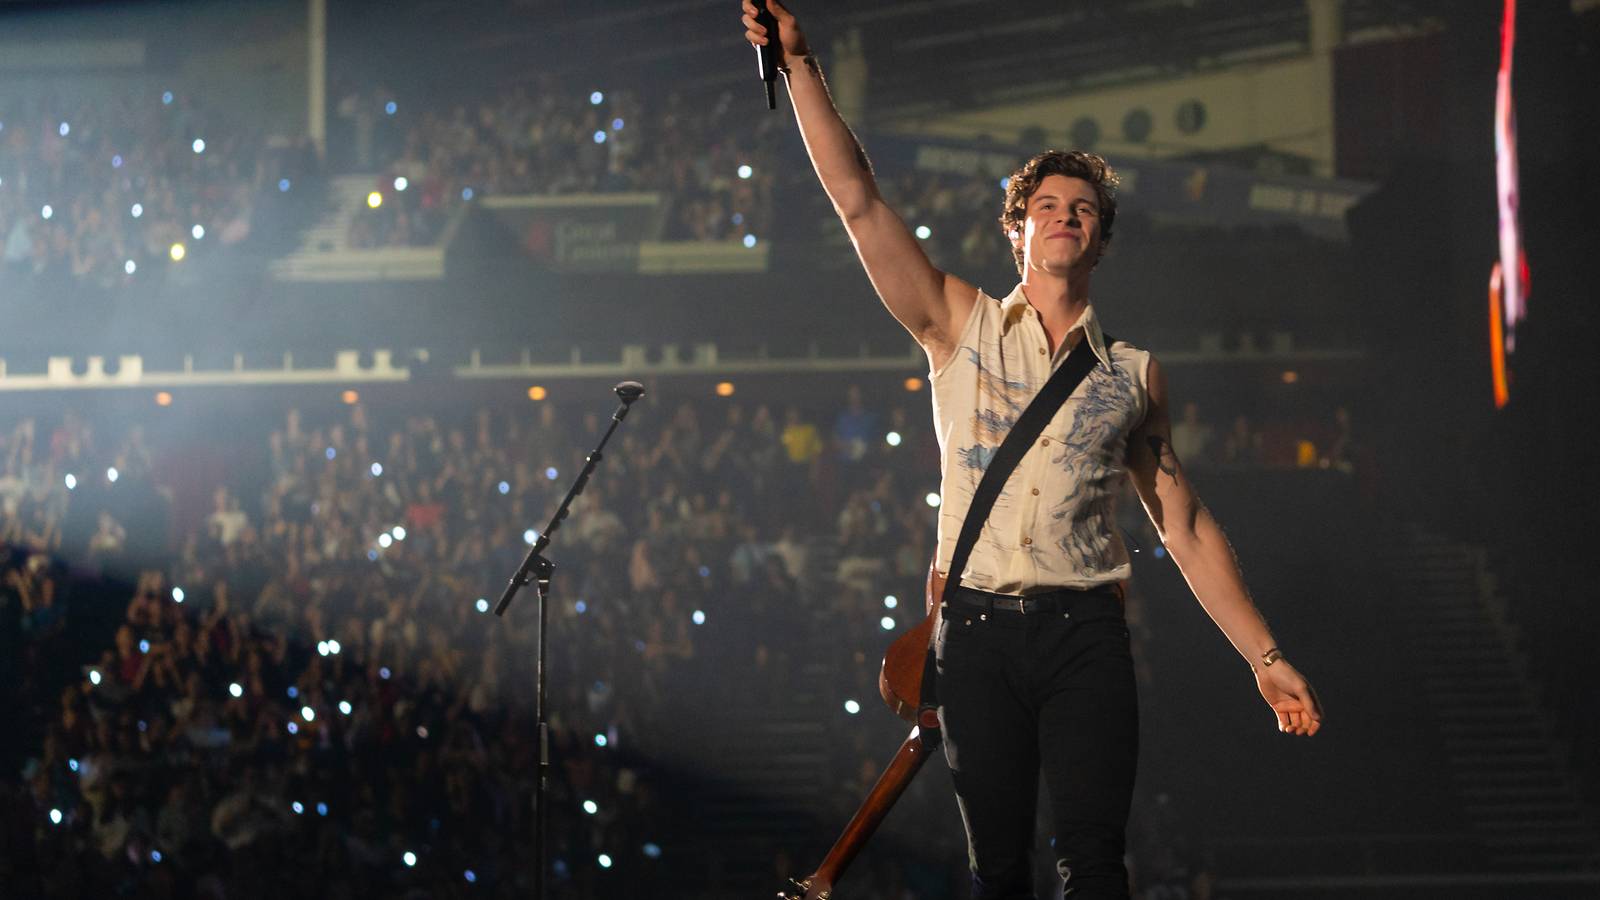 He's Taken, But Shawn Mendes Shows That He's The Perfect Candidate For The Bachelor Anyway At His 2nd Concert In S'pore